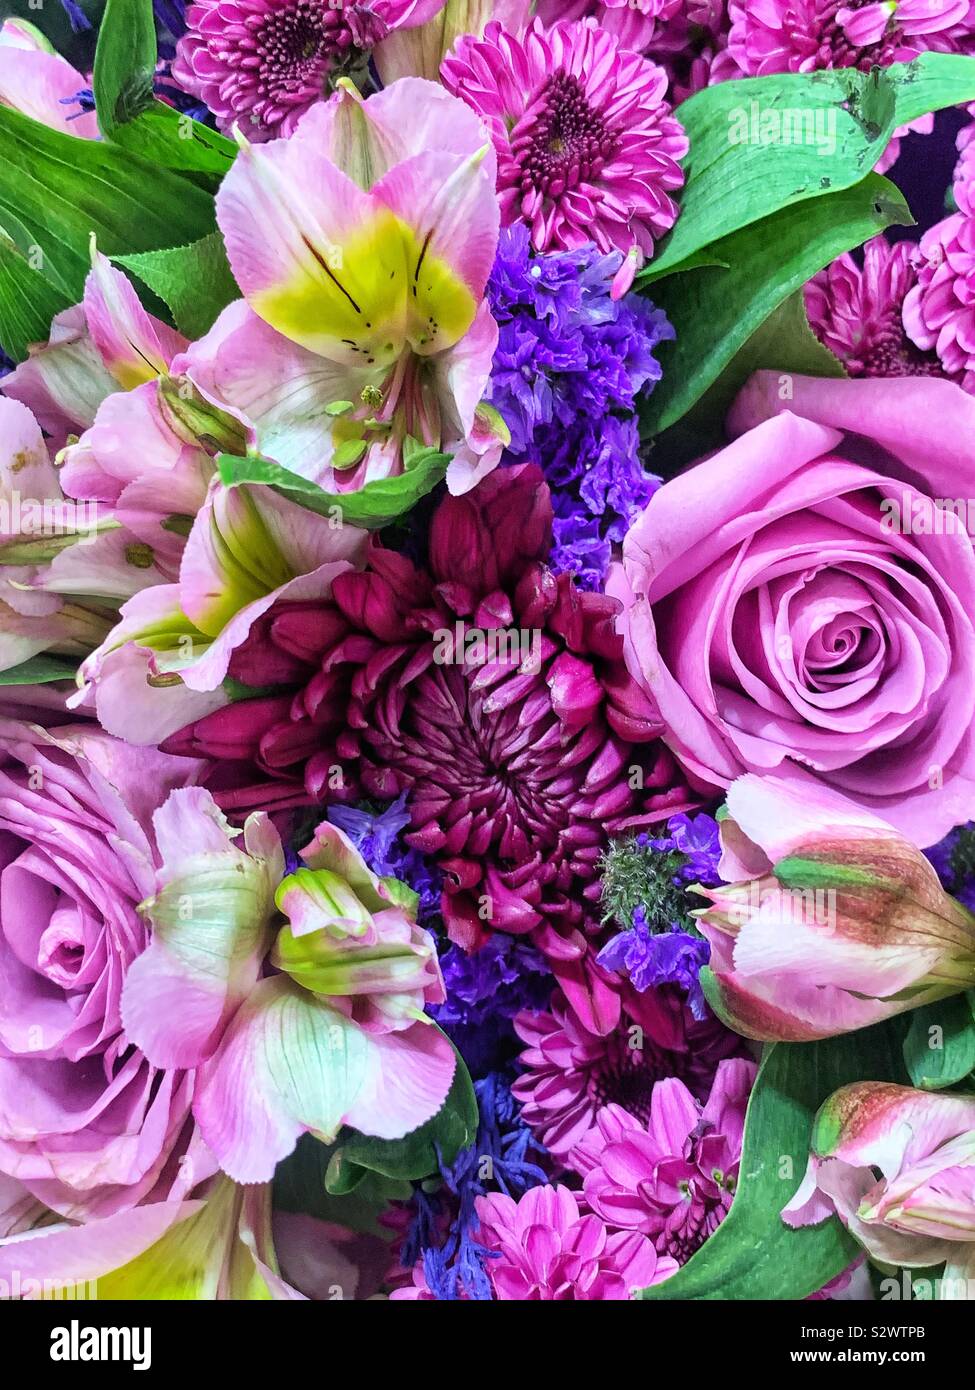 Flower bouquet full of pink and purple roses and chrysanthemums and crocus. Stock Photo